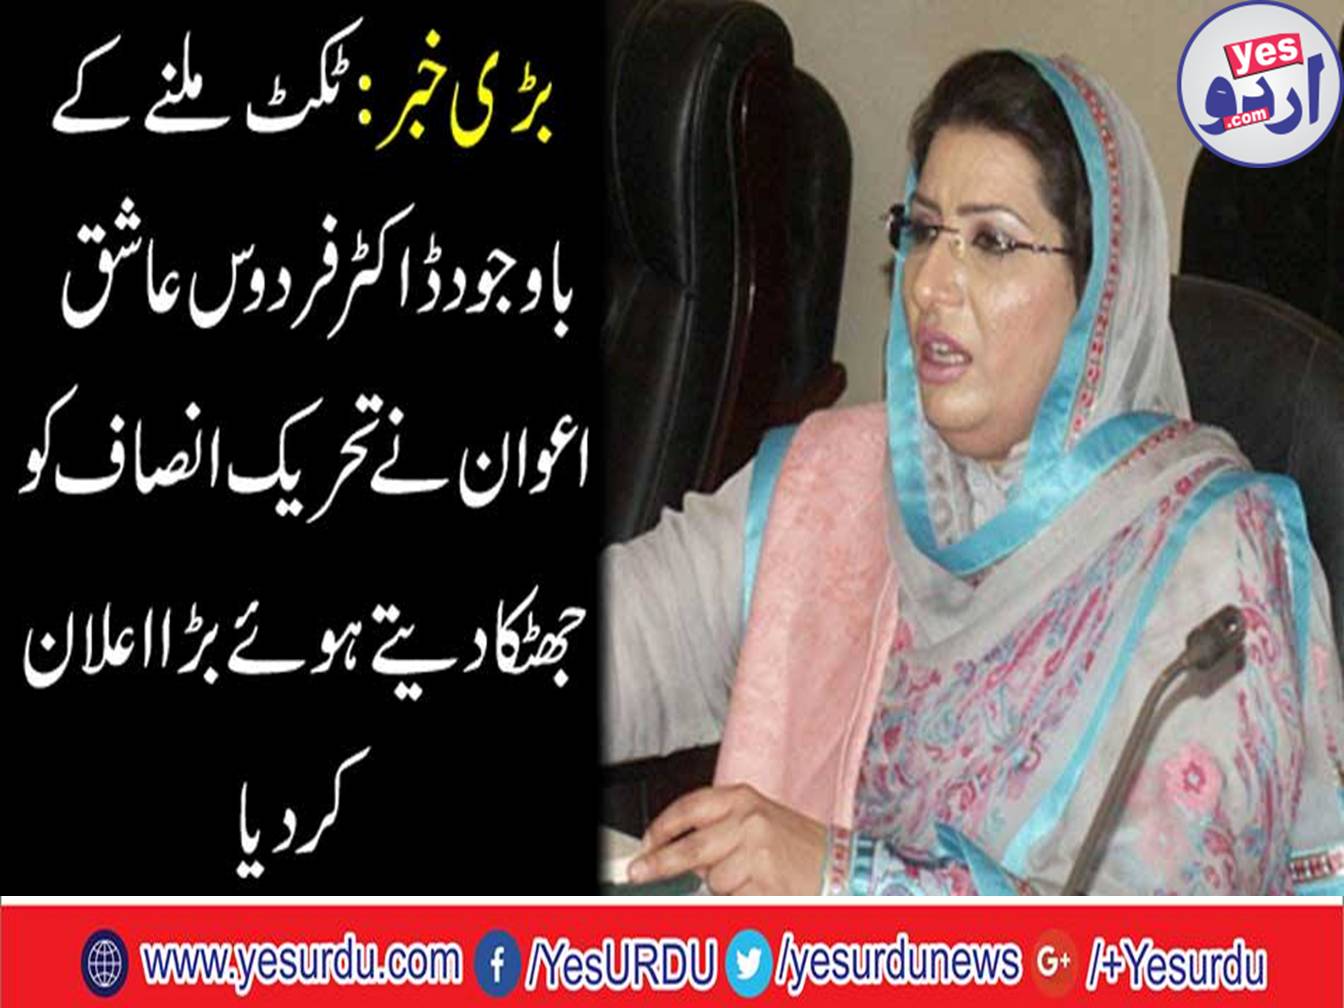 Despite getting a ticket, Firdous Ashiq Awan is angry